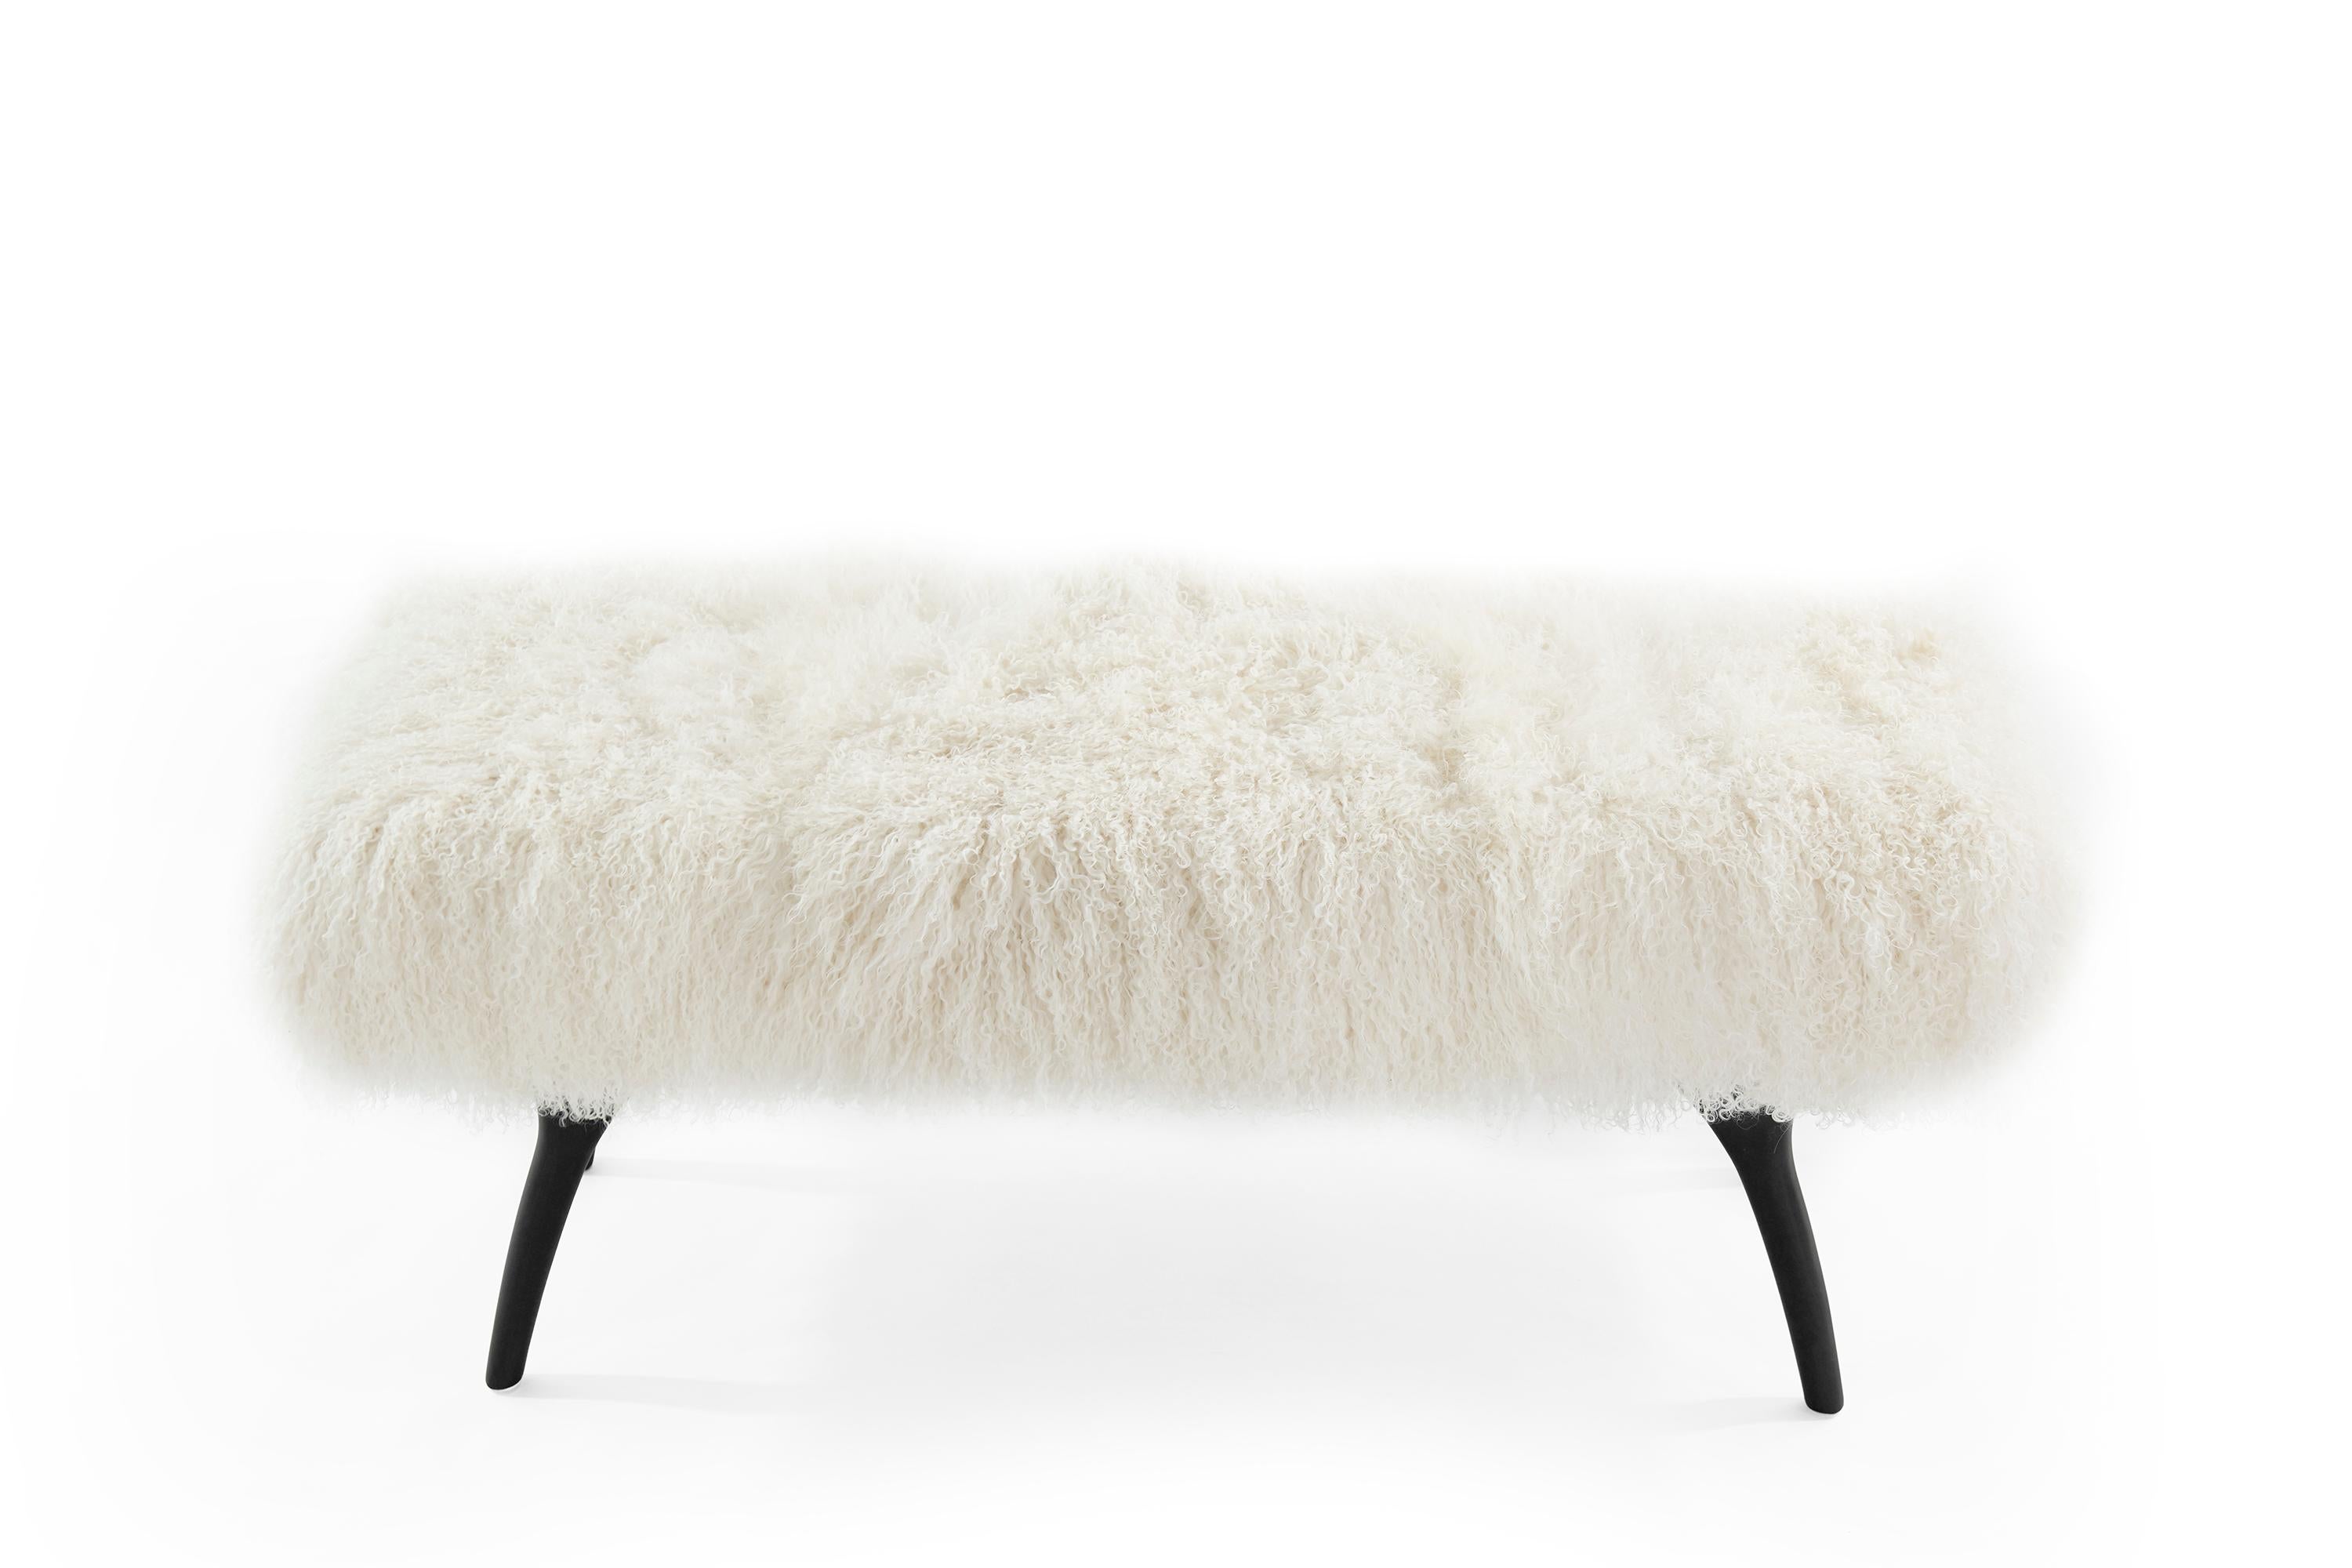 The Crescent Bench floats effortlessly, poised on bronze fingertips. Inspired by 20th-century visionaries like Gio Ponti and Vladimir Kagan, this bench offers a unique perspective. The plush bench cushion is shown upholstered in creamy Mongolian